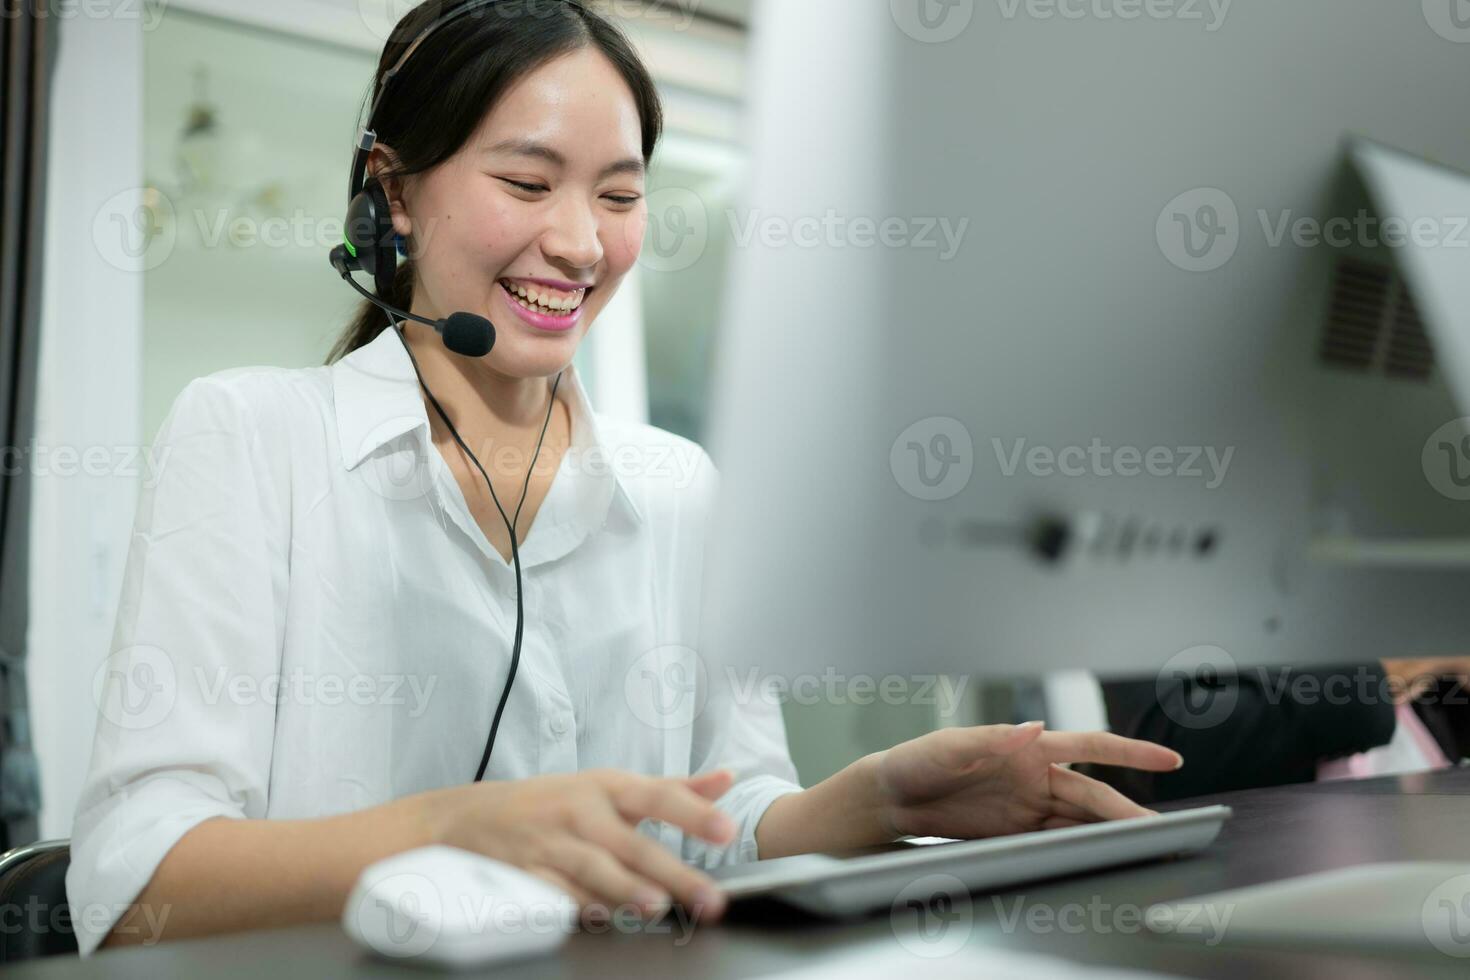 Portrait of business people wearing headset working actively in office.  Call center, telemarketing, customer support agent provide service on telephone  video conference call. 31608287 Stock Photo at Vecteezy